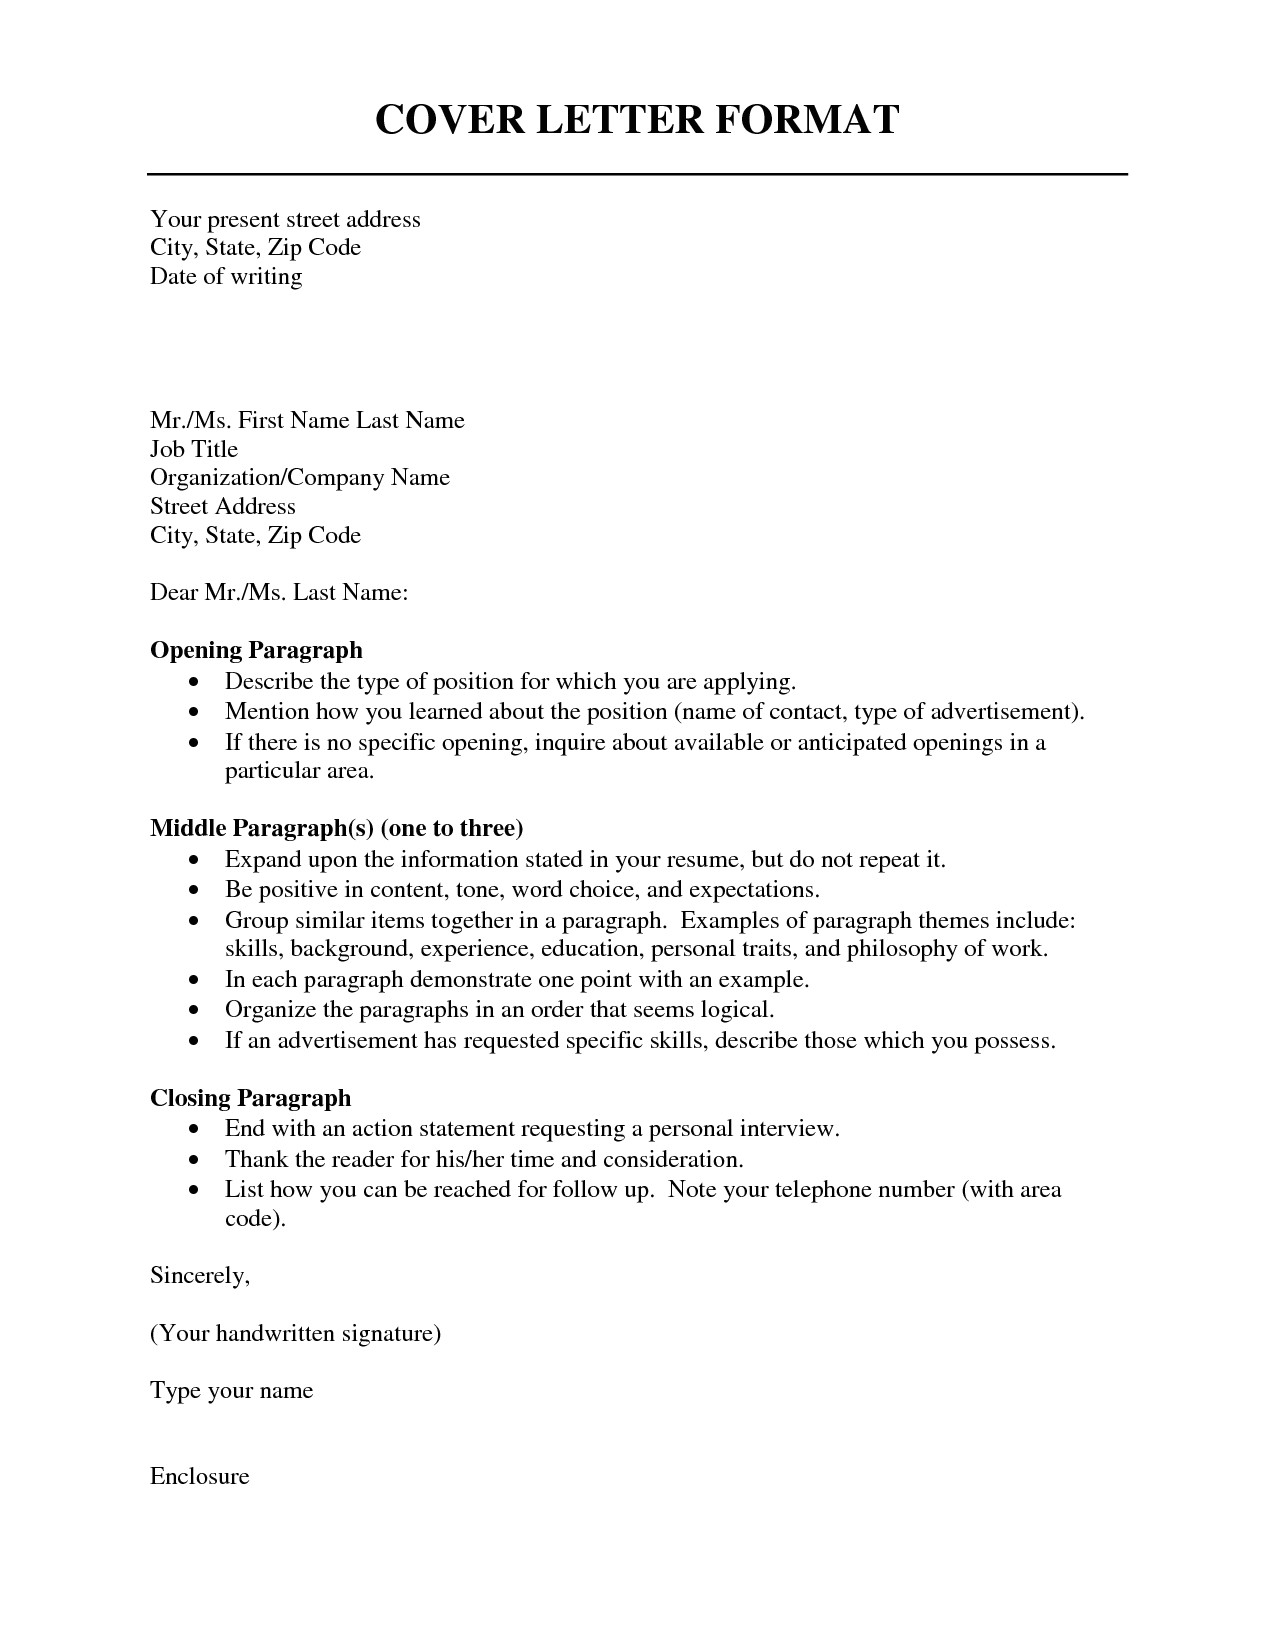 What Information Goes In A Cover Letter Correct Cover Letter format Best Template Collection